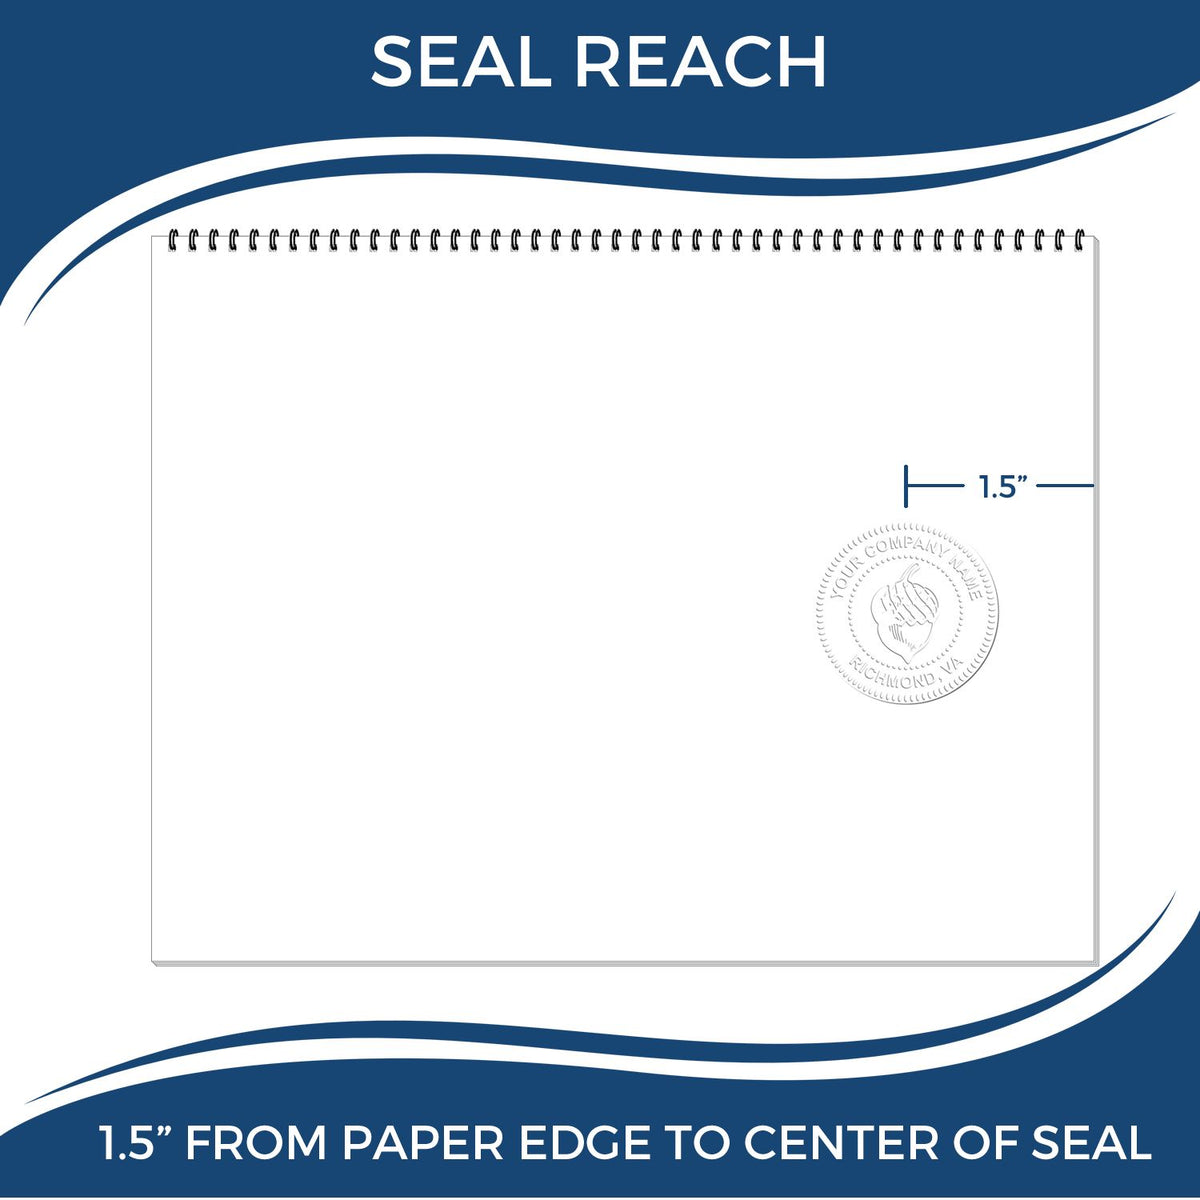 An infographic showing the seal reach which is represented by a ruler and a miniature seal image of the Handheld Georgia Architect Seal Embosser